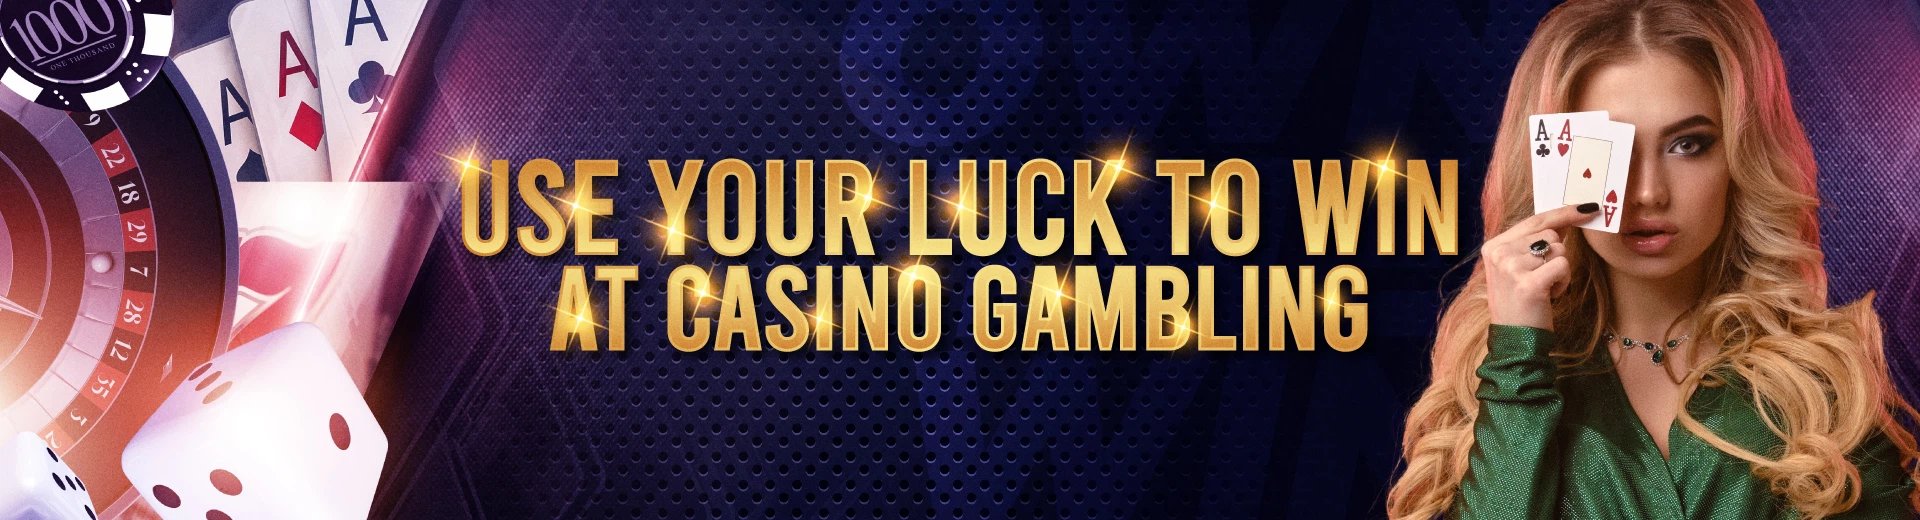 How To Use Your Luck To Win At Casino Gambling - OKBET casino games